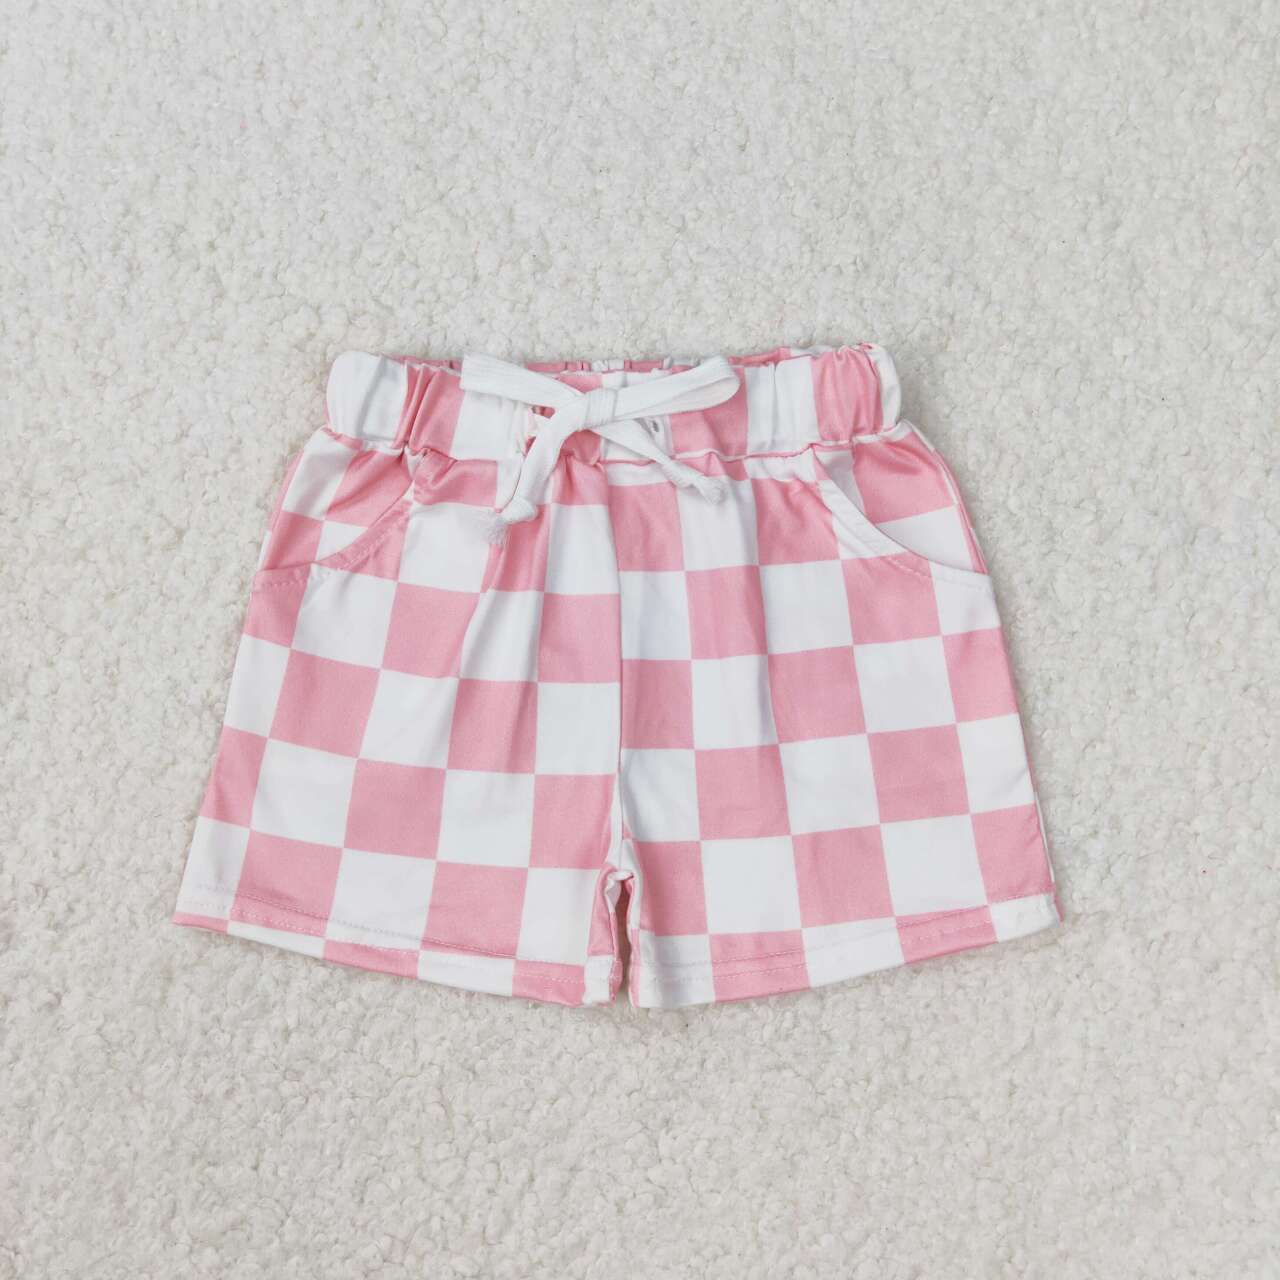 SS0258 Pink and white plaid shorts